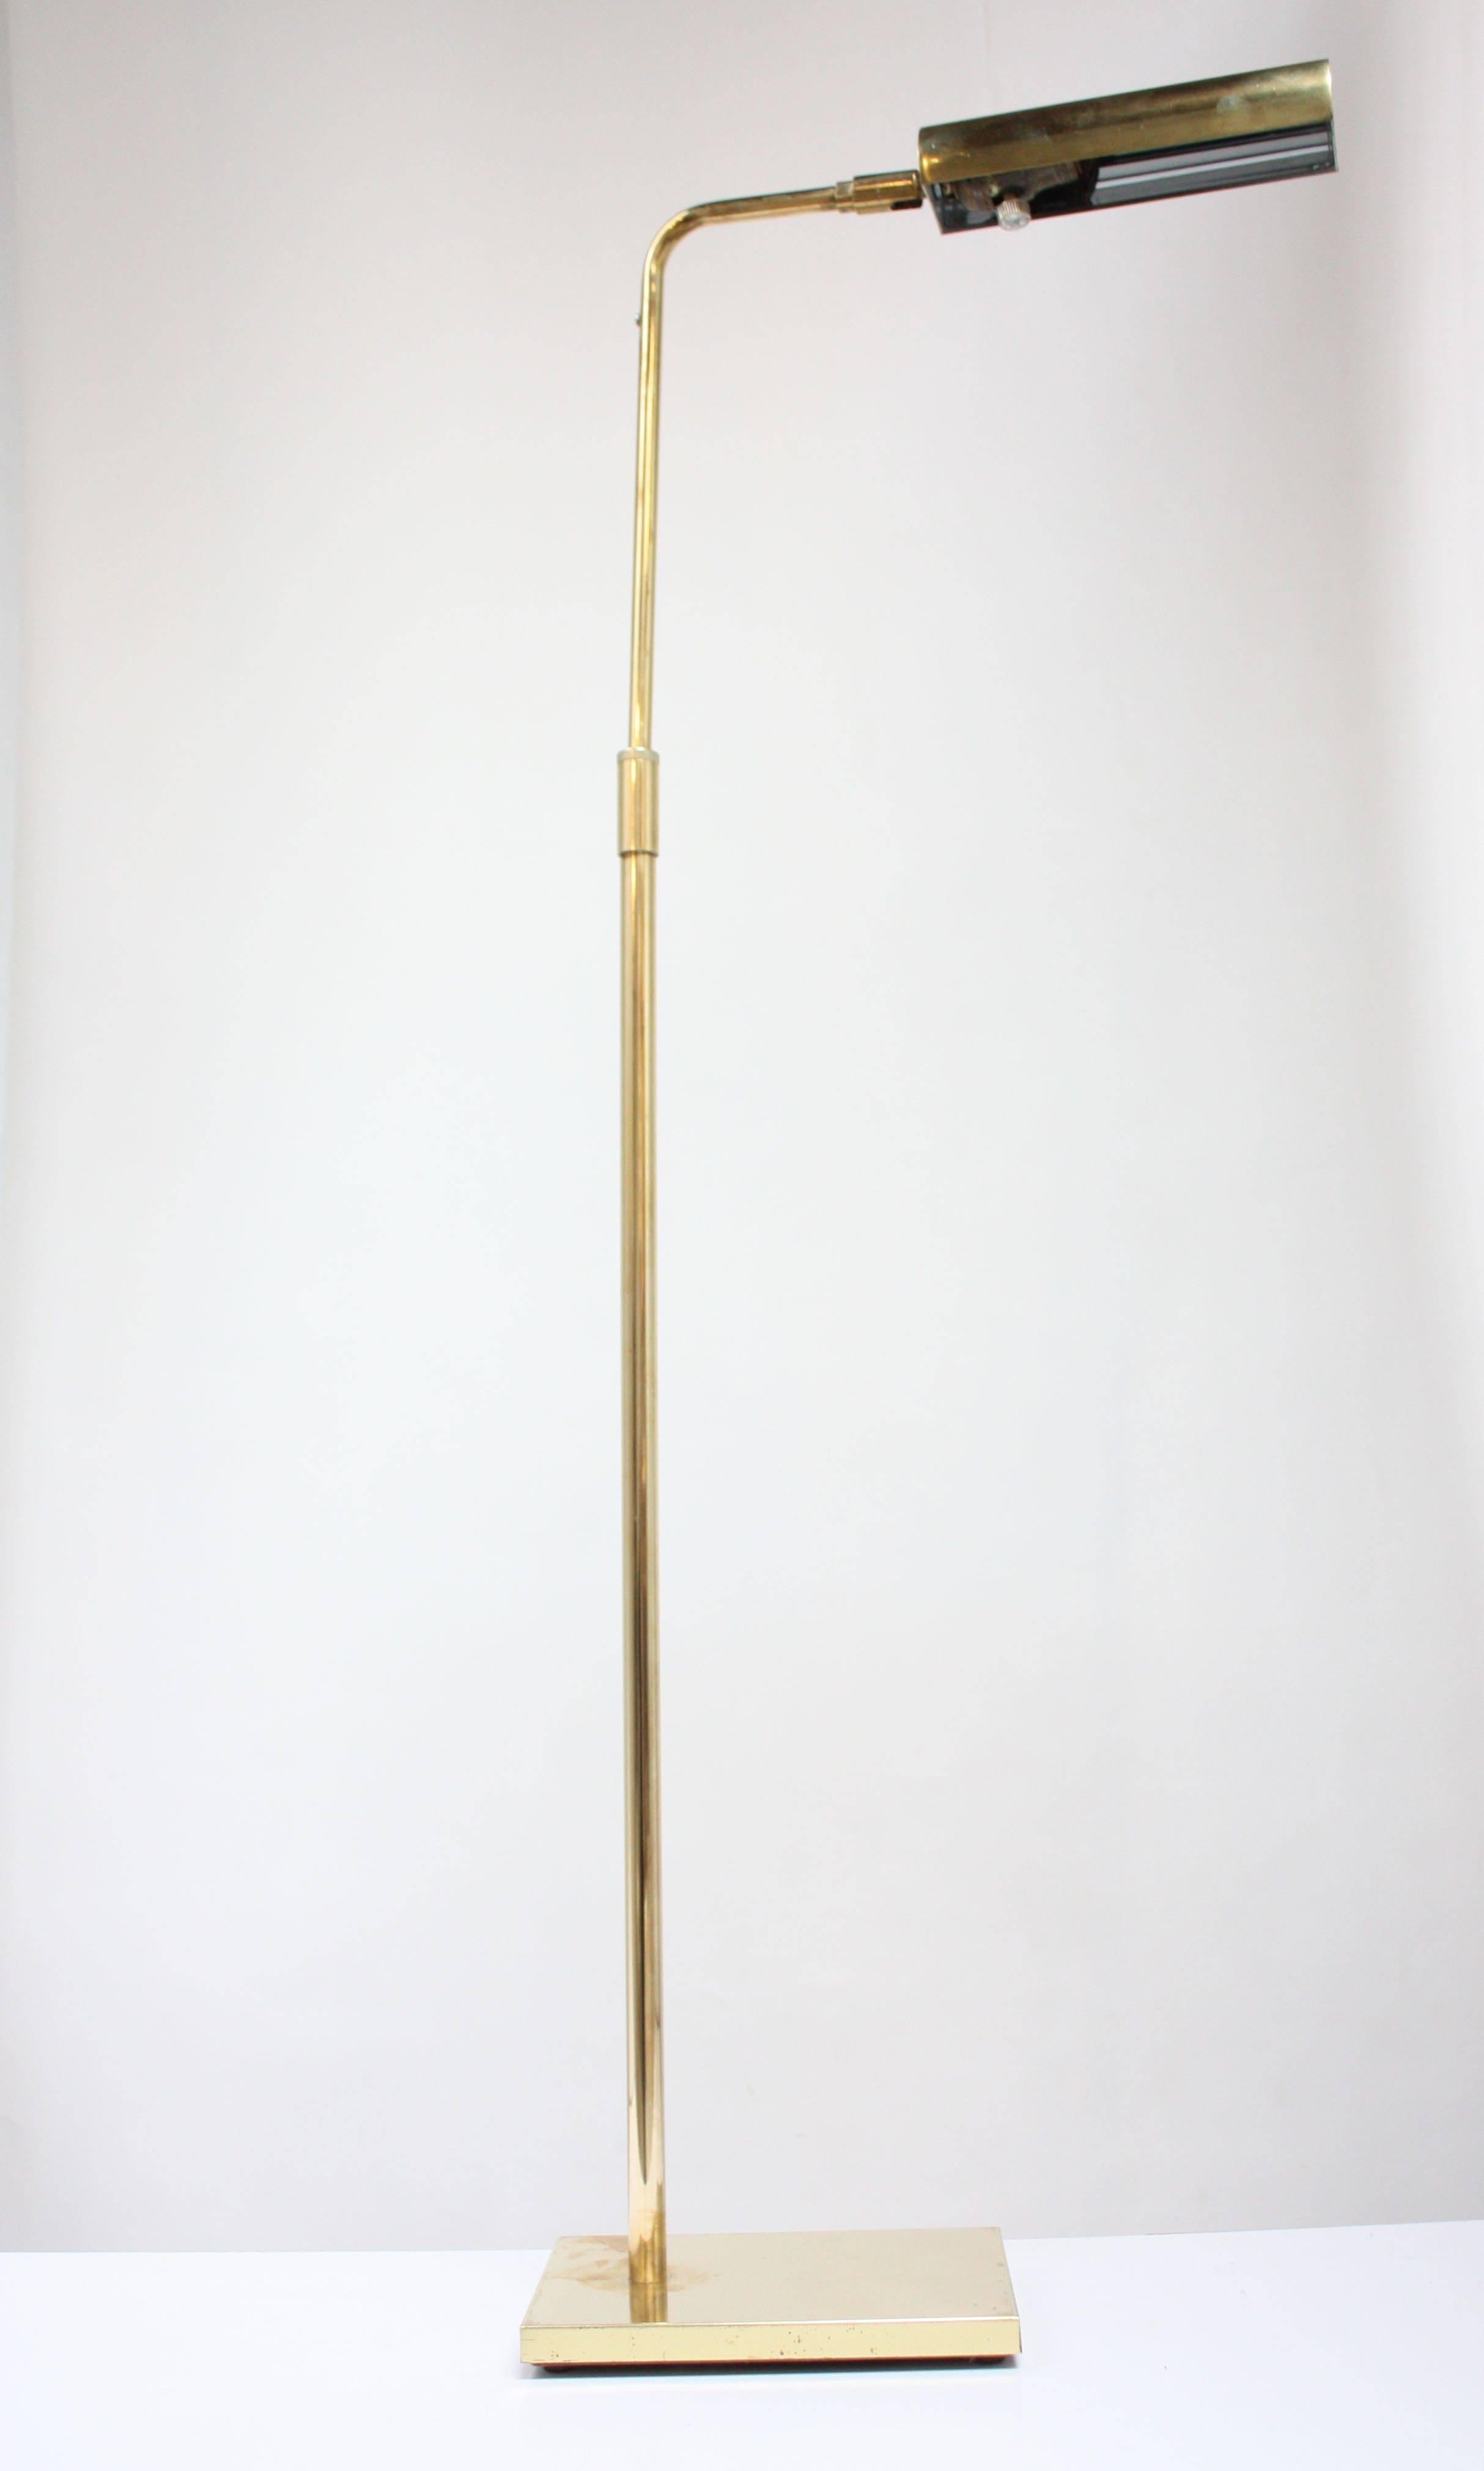 This minimal, yet versatile brass pharmacy floor lamp from Koch and Lowy is composed of an adjustable and swiveling shade. Additionally, the height can be adjusted. There is wear to the base, but the lamp has been polished and otherwise shows